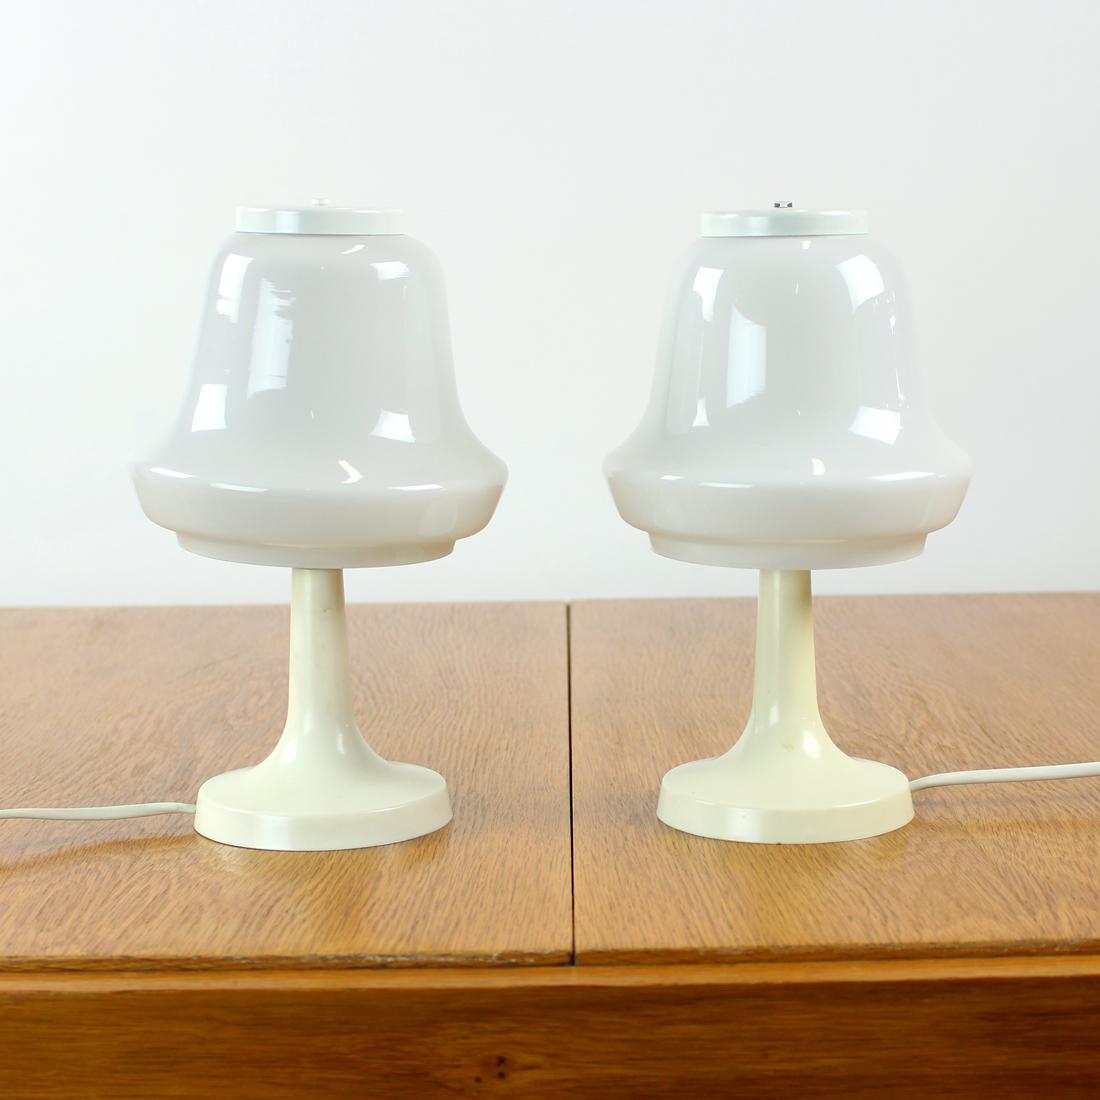 Set of two beautiful table lamps from midcentury era in elegant design. Produced by OPP Jihalava in 1960s, original labels still visible. The lamps are made of two basic components, off-white bakelite base and opaline glass white shade. The shade is